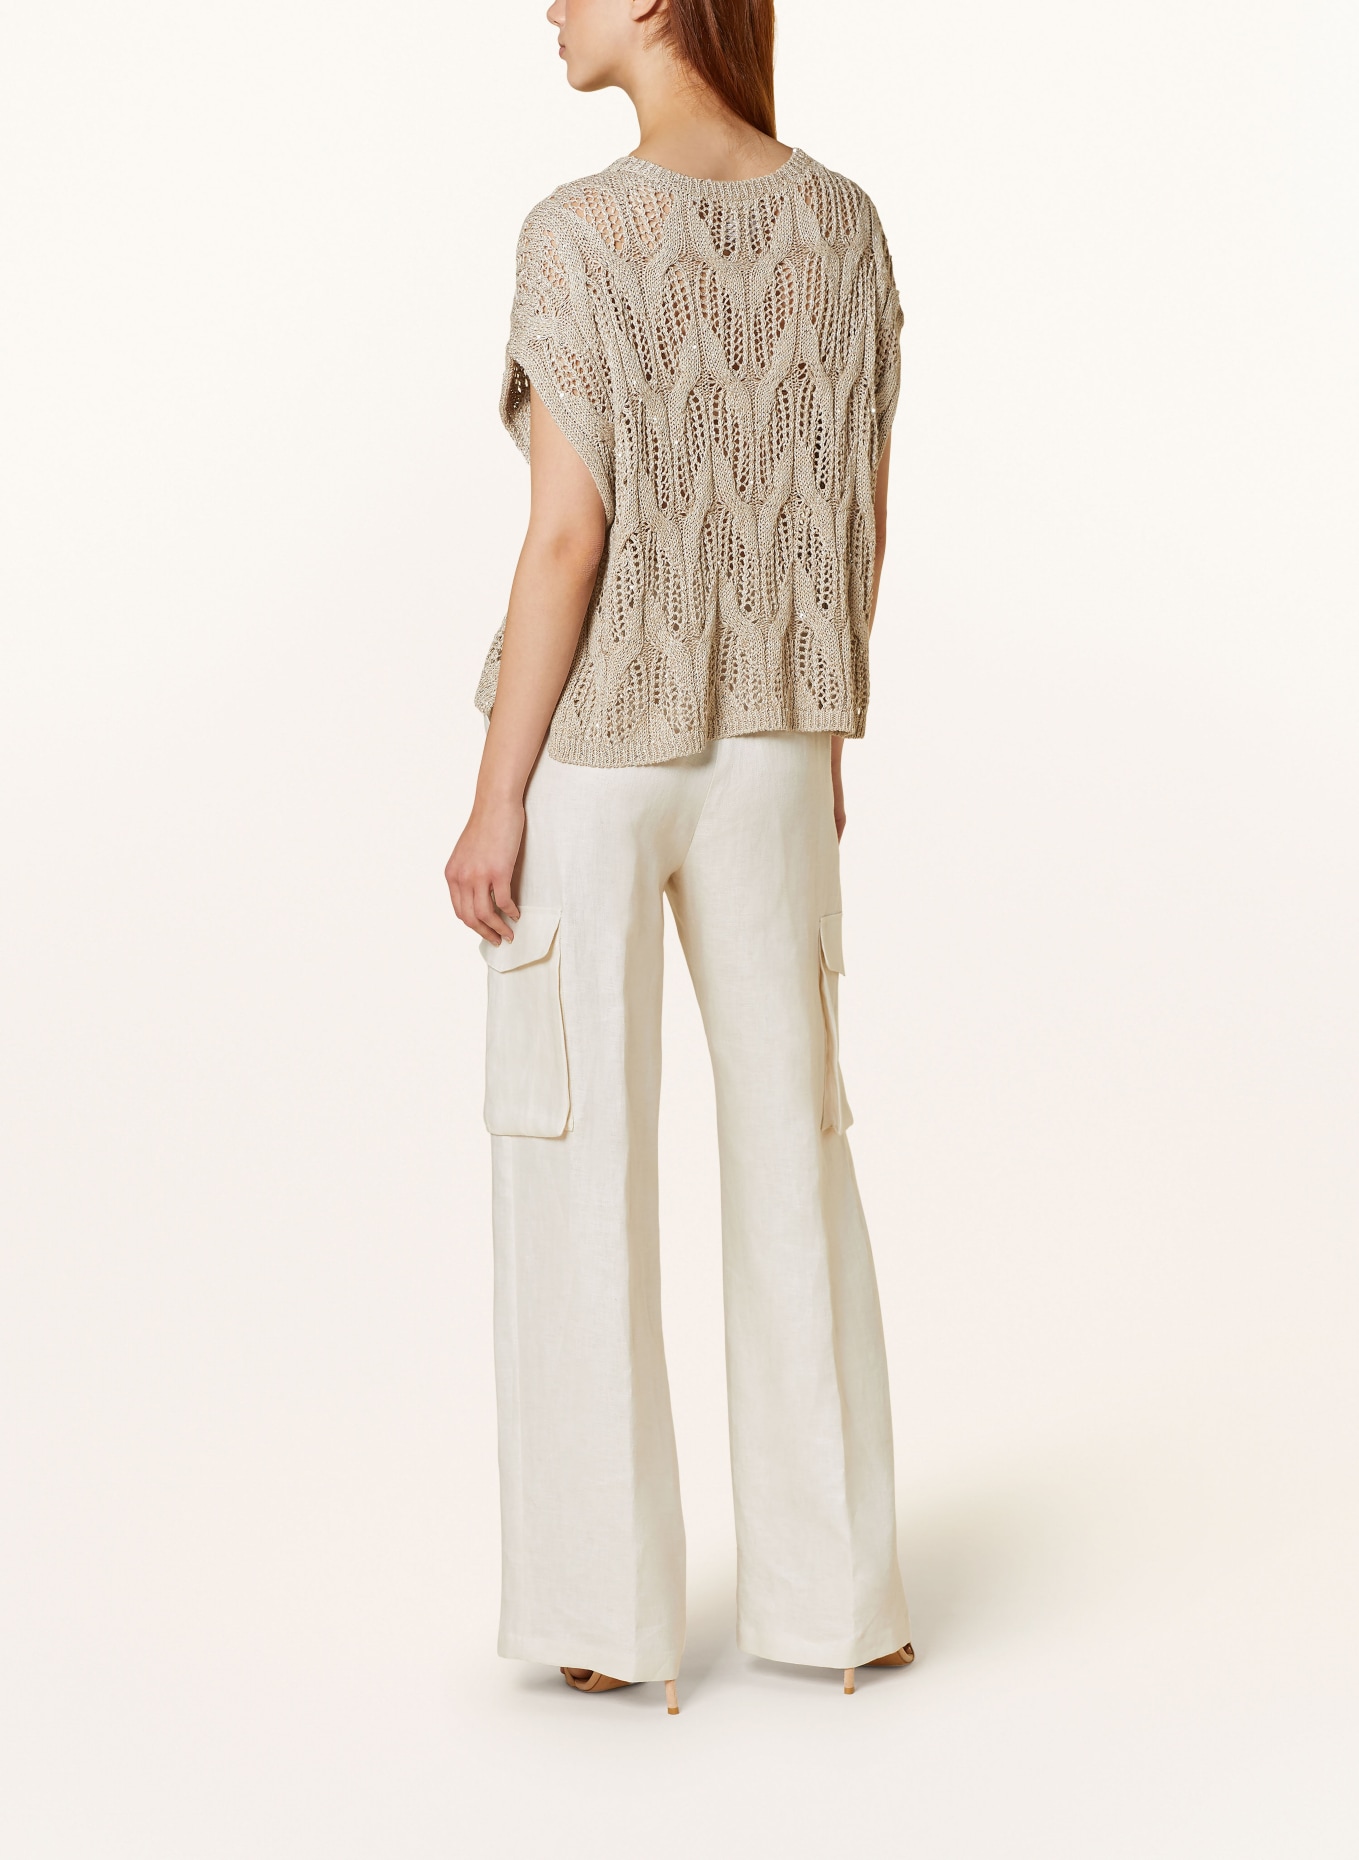 ANTONELLI firenze Knit shirt ITALICO with sequins, Color: BEIGE (Image 3)